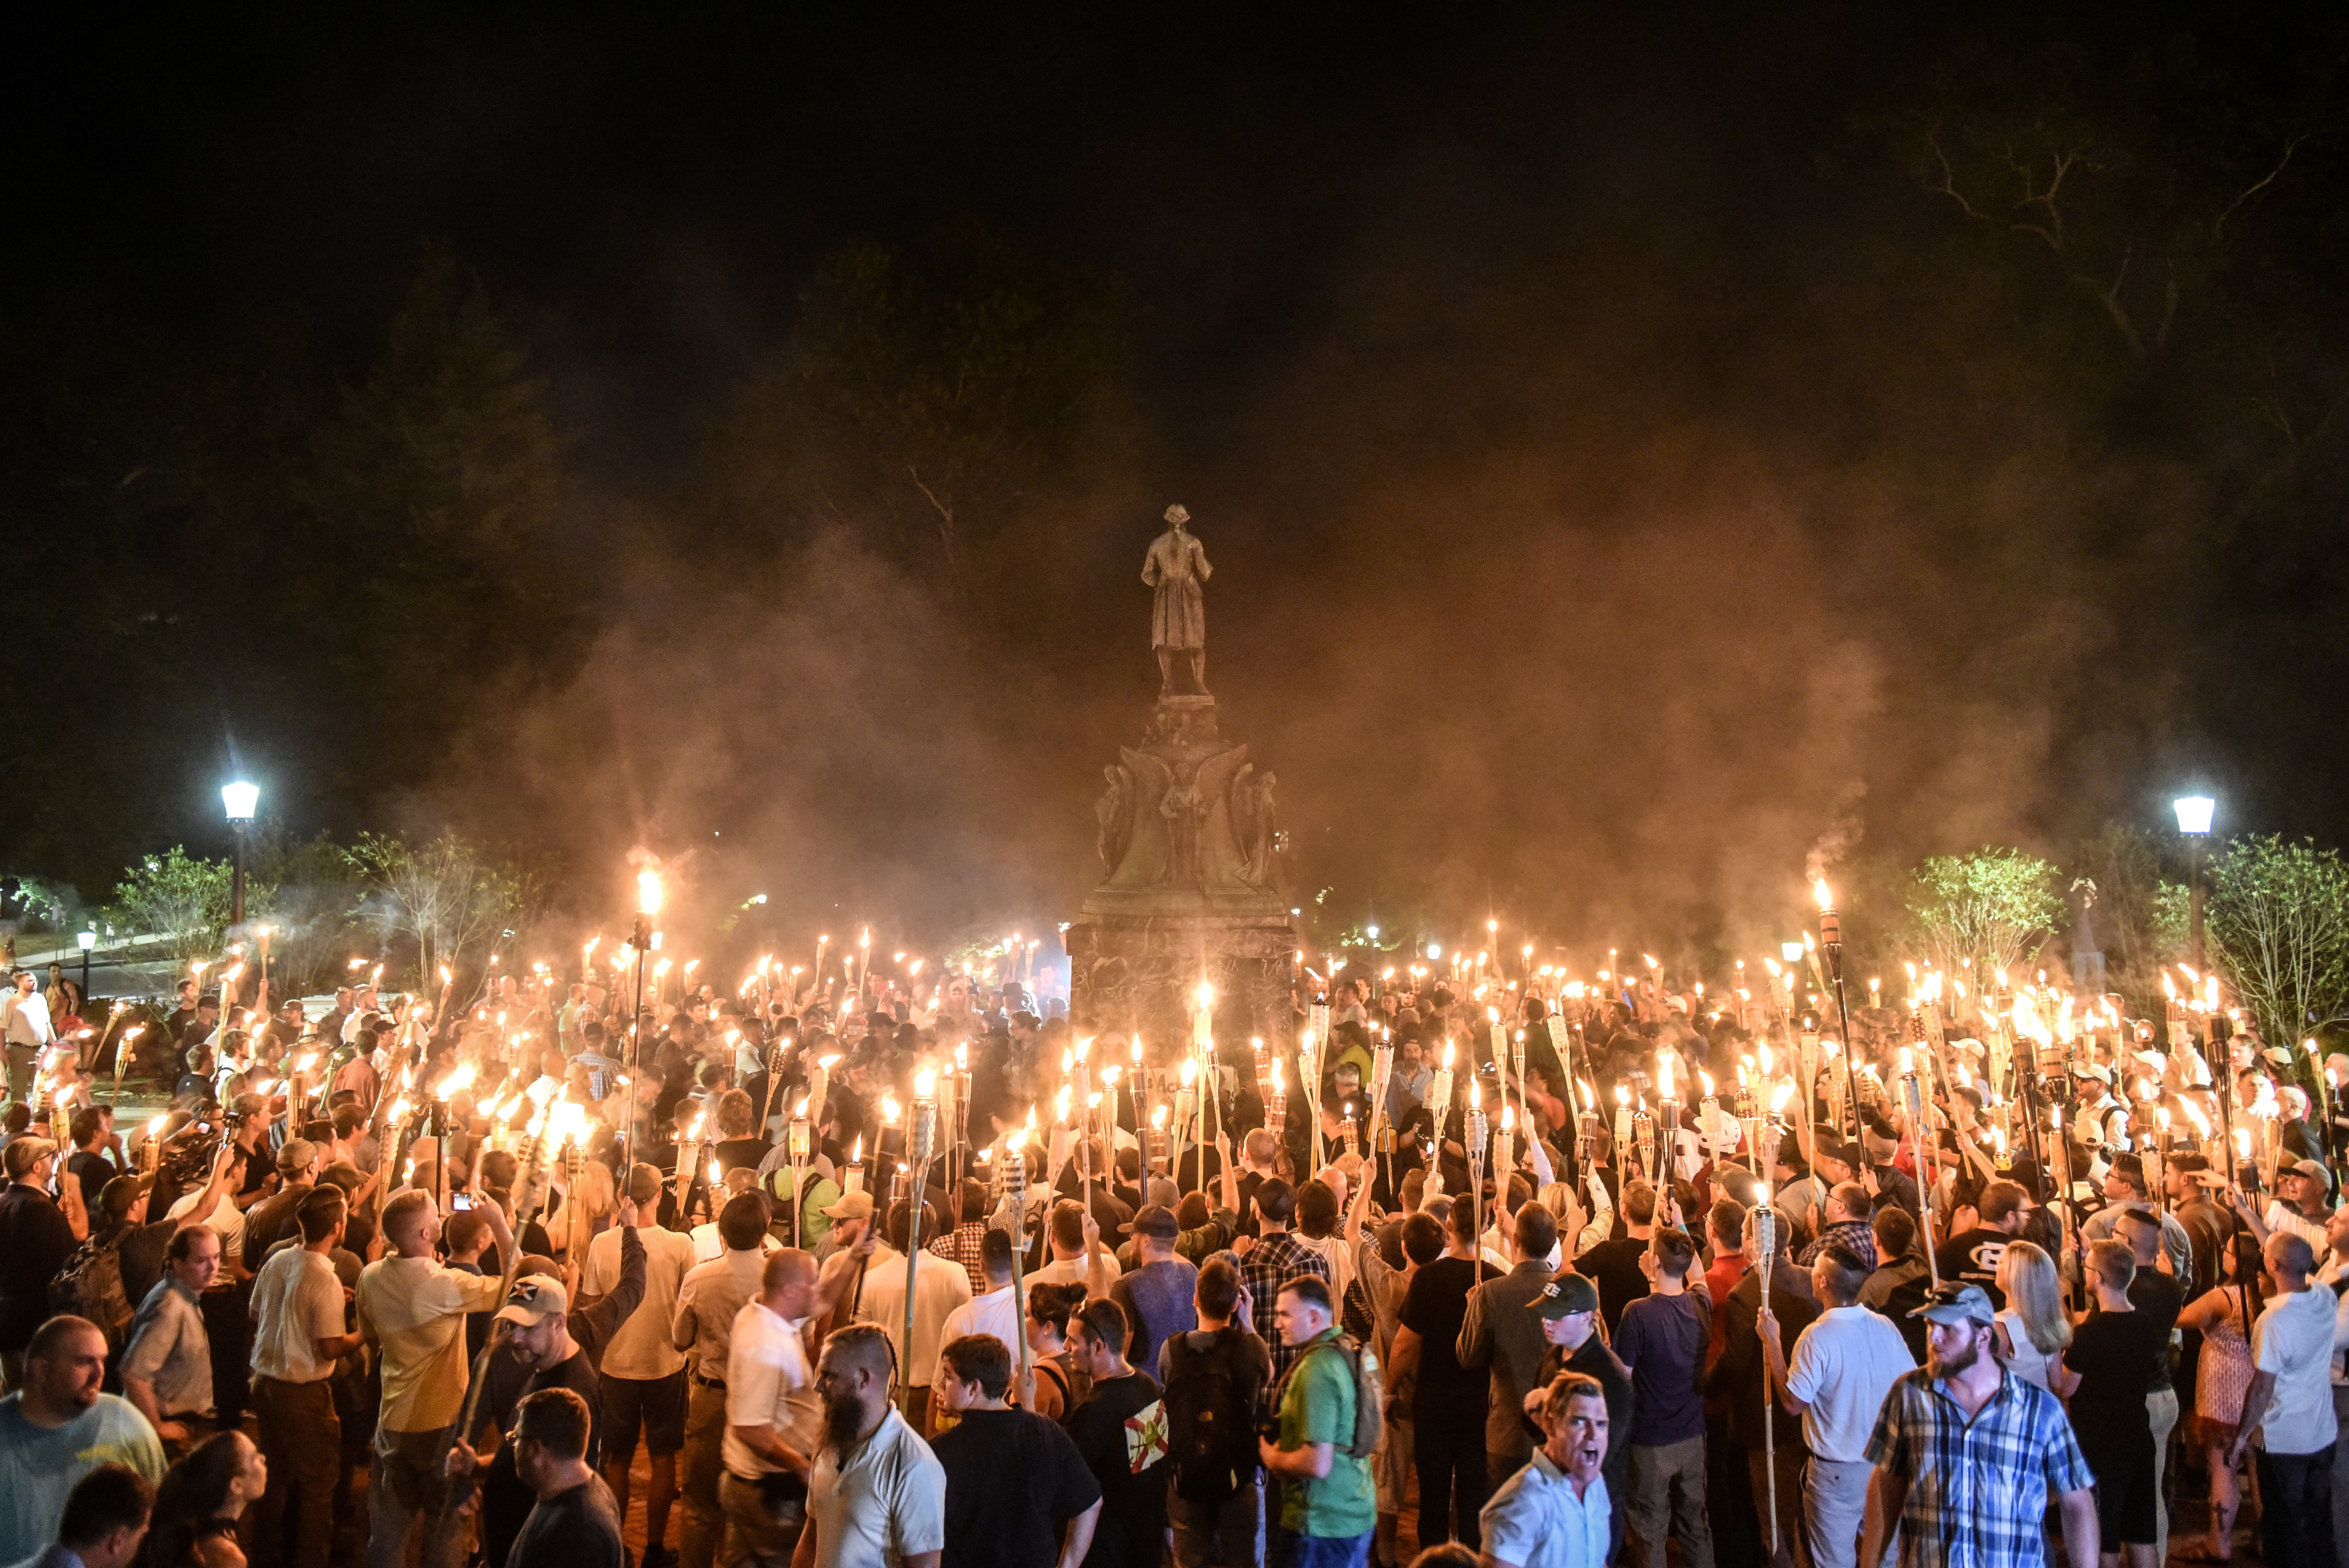 White nationalists participate in a torch-lit march on the grounds of the University of Virginia ahead of the Unite the Right Rally in Charlottesville, Virginia